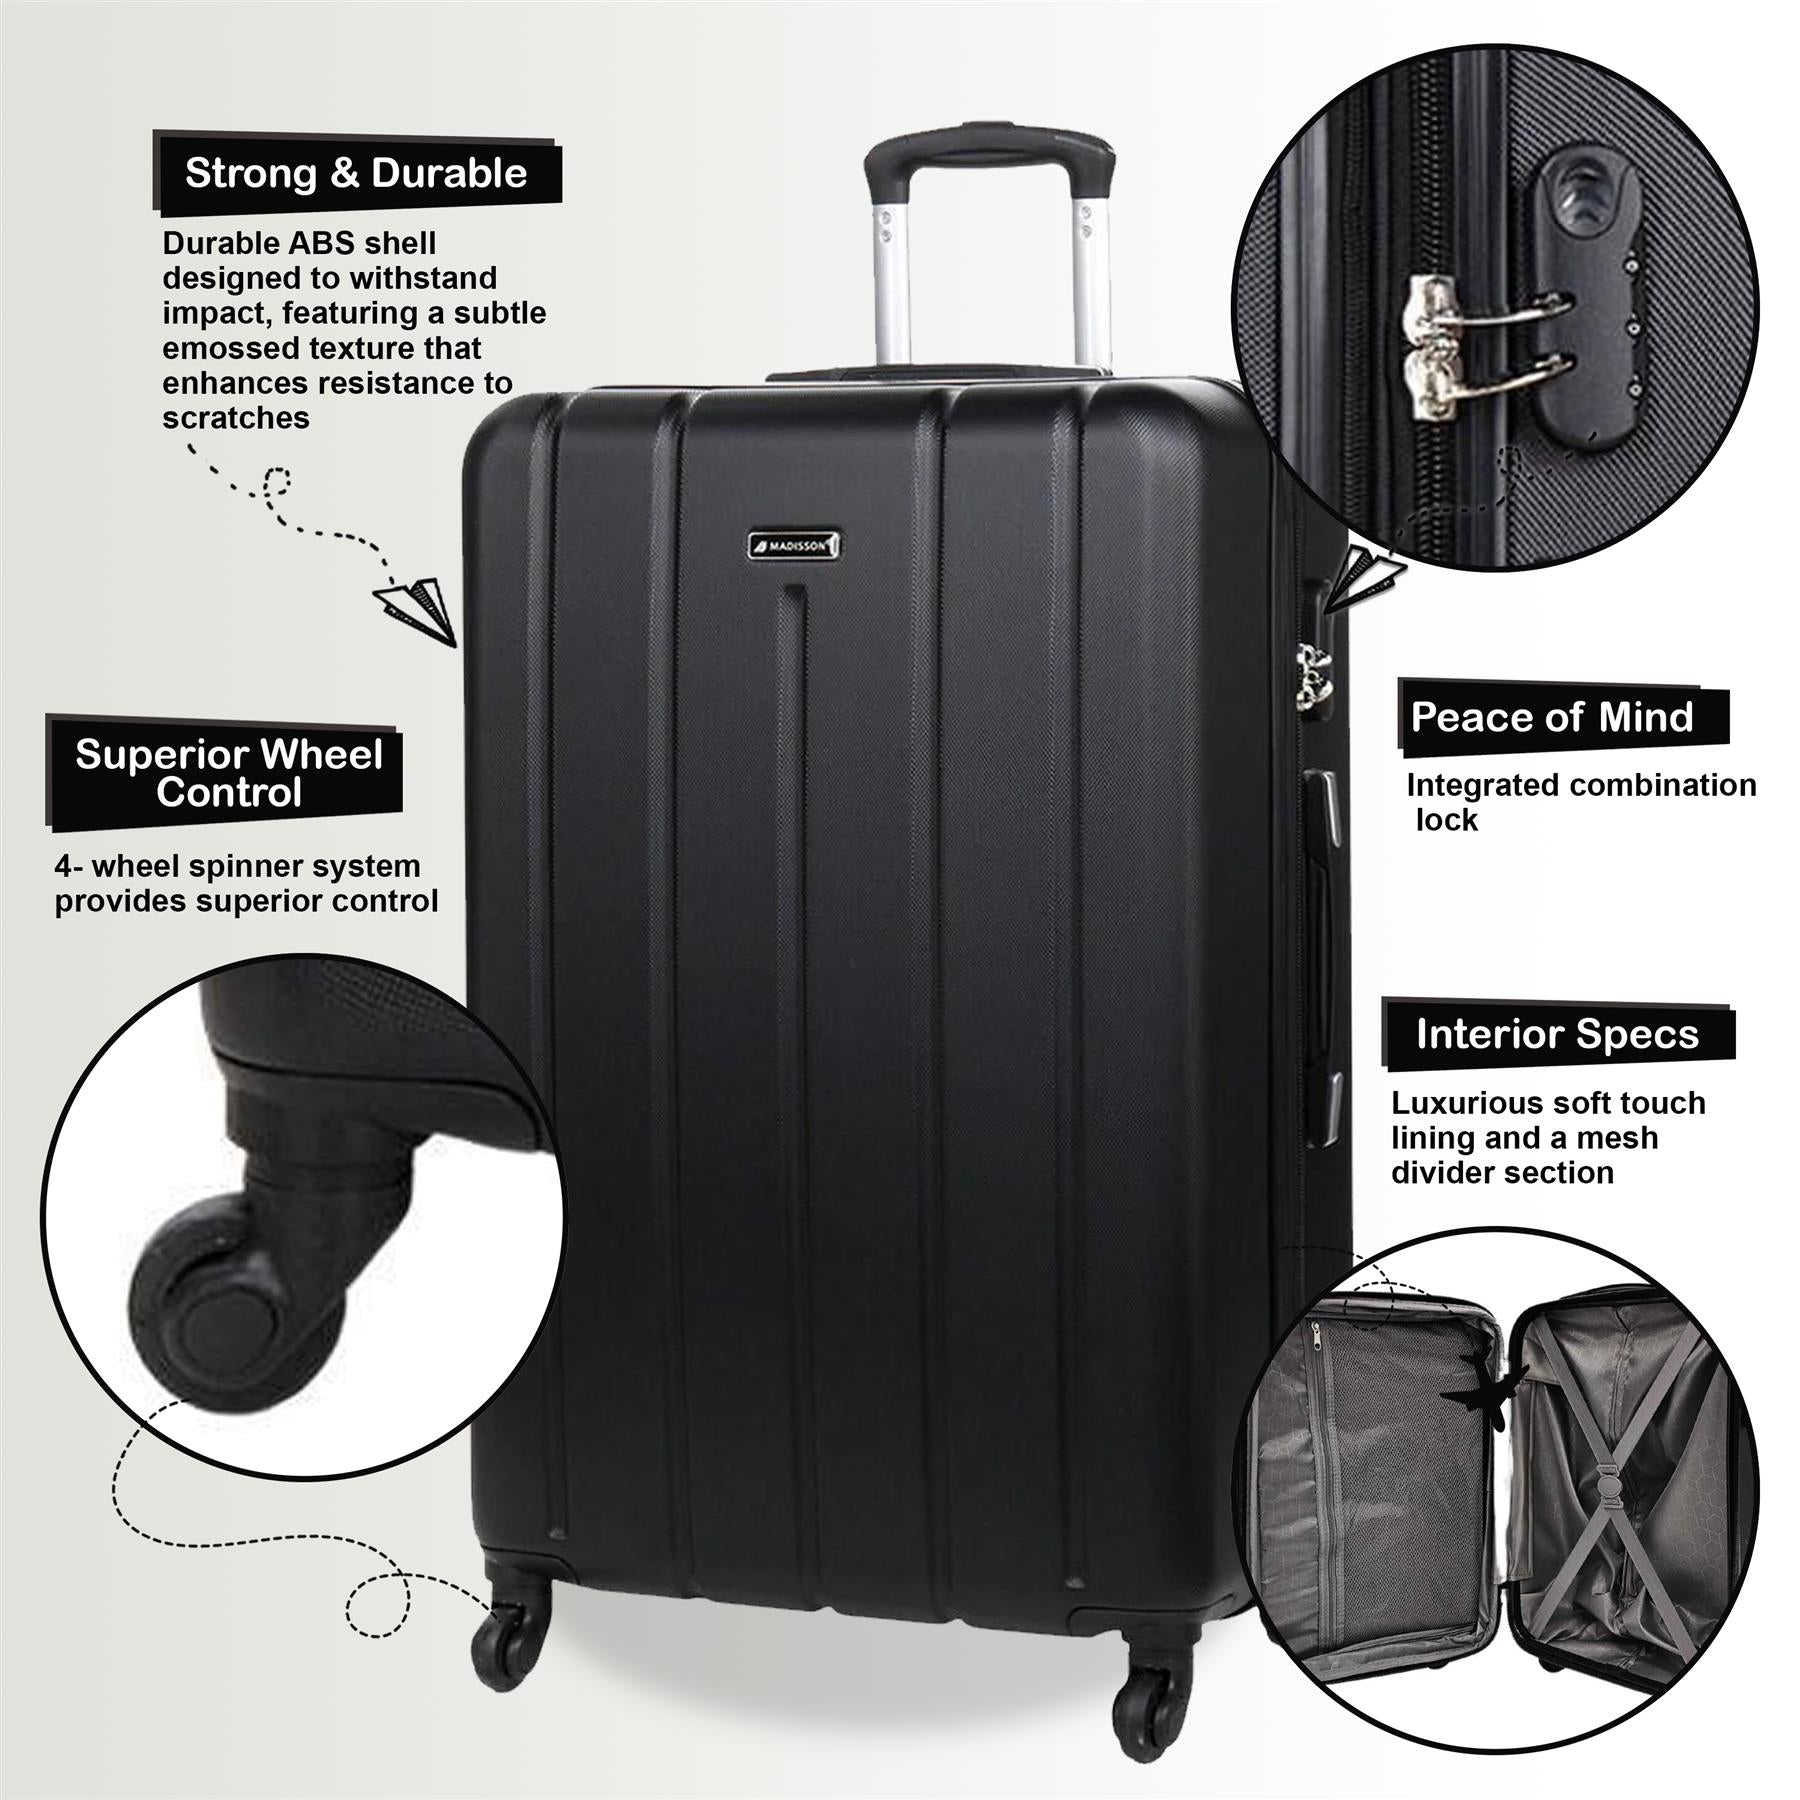 Castleberry Set of 3 Hard Shell Suitcase in Black